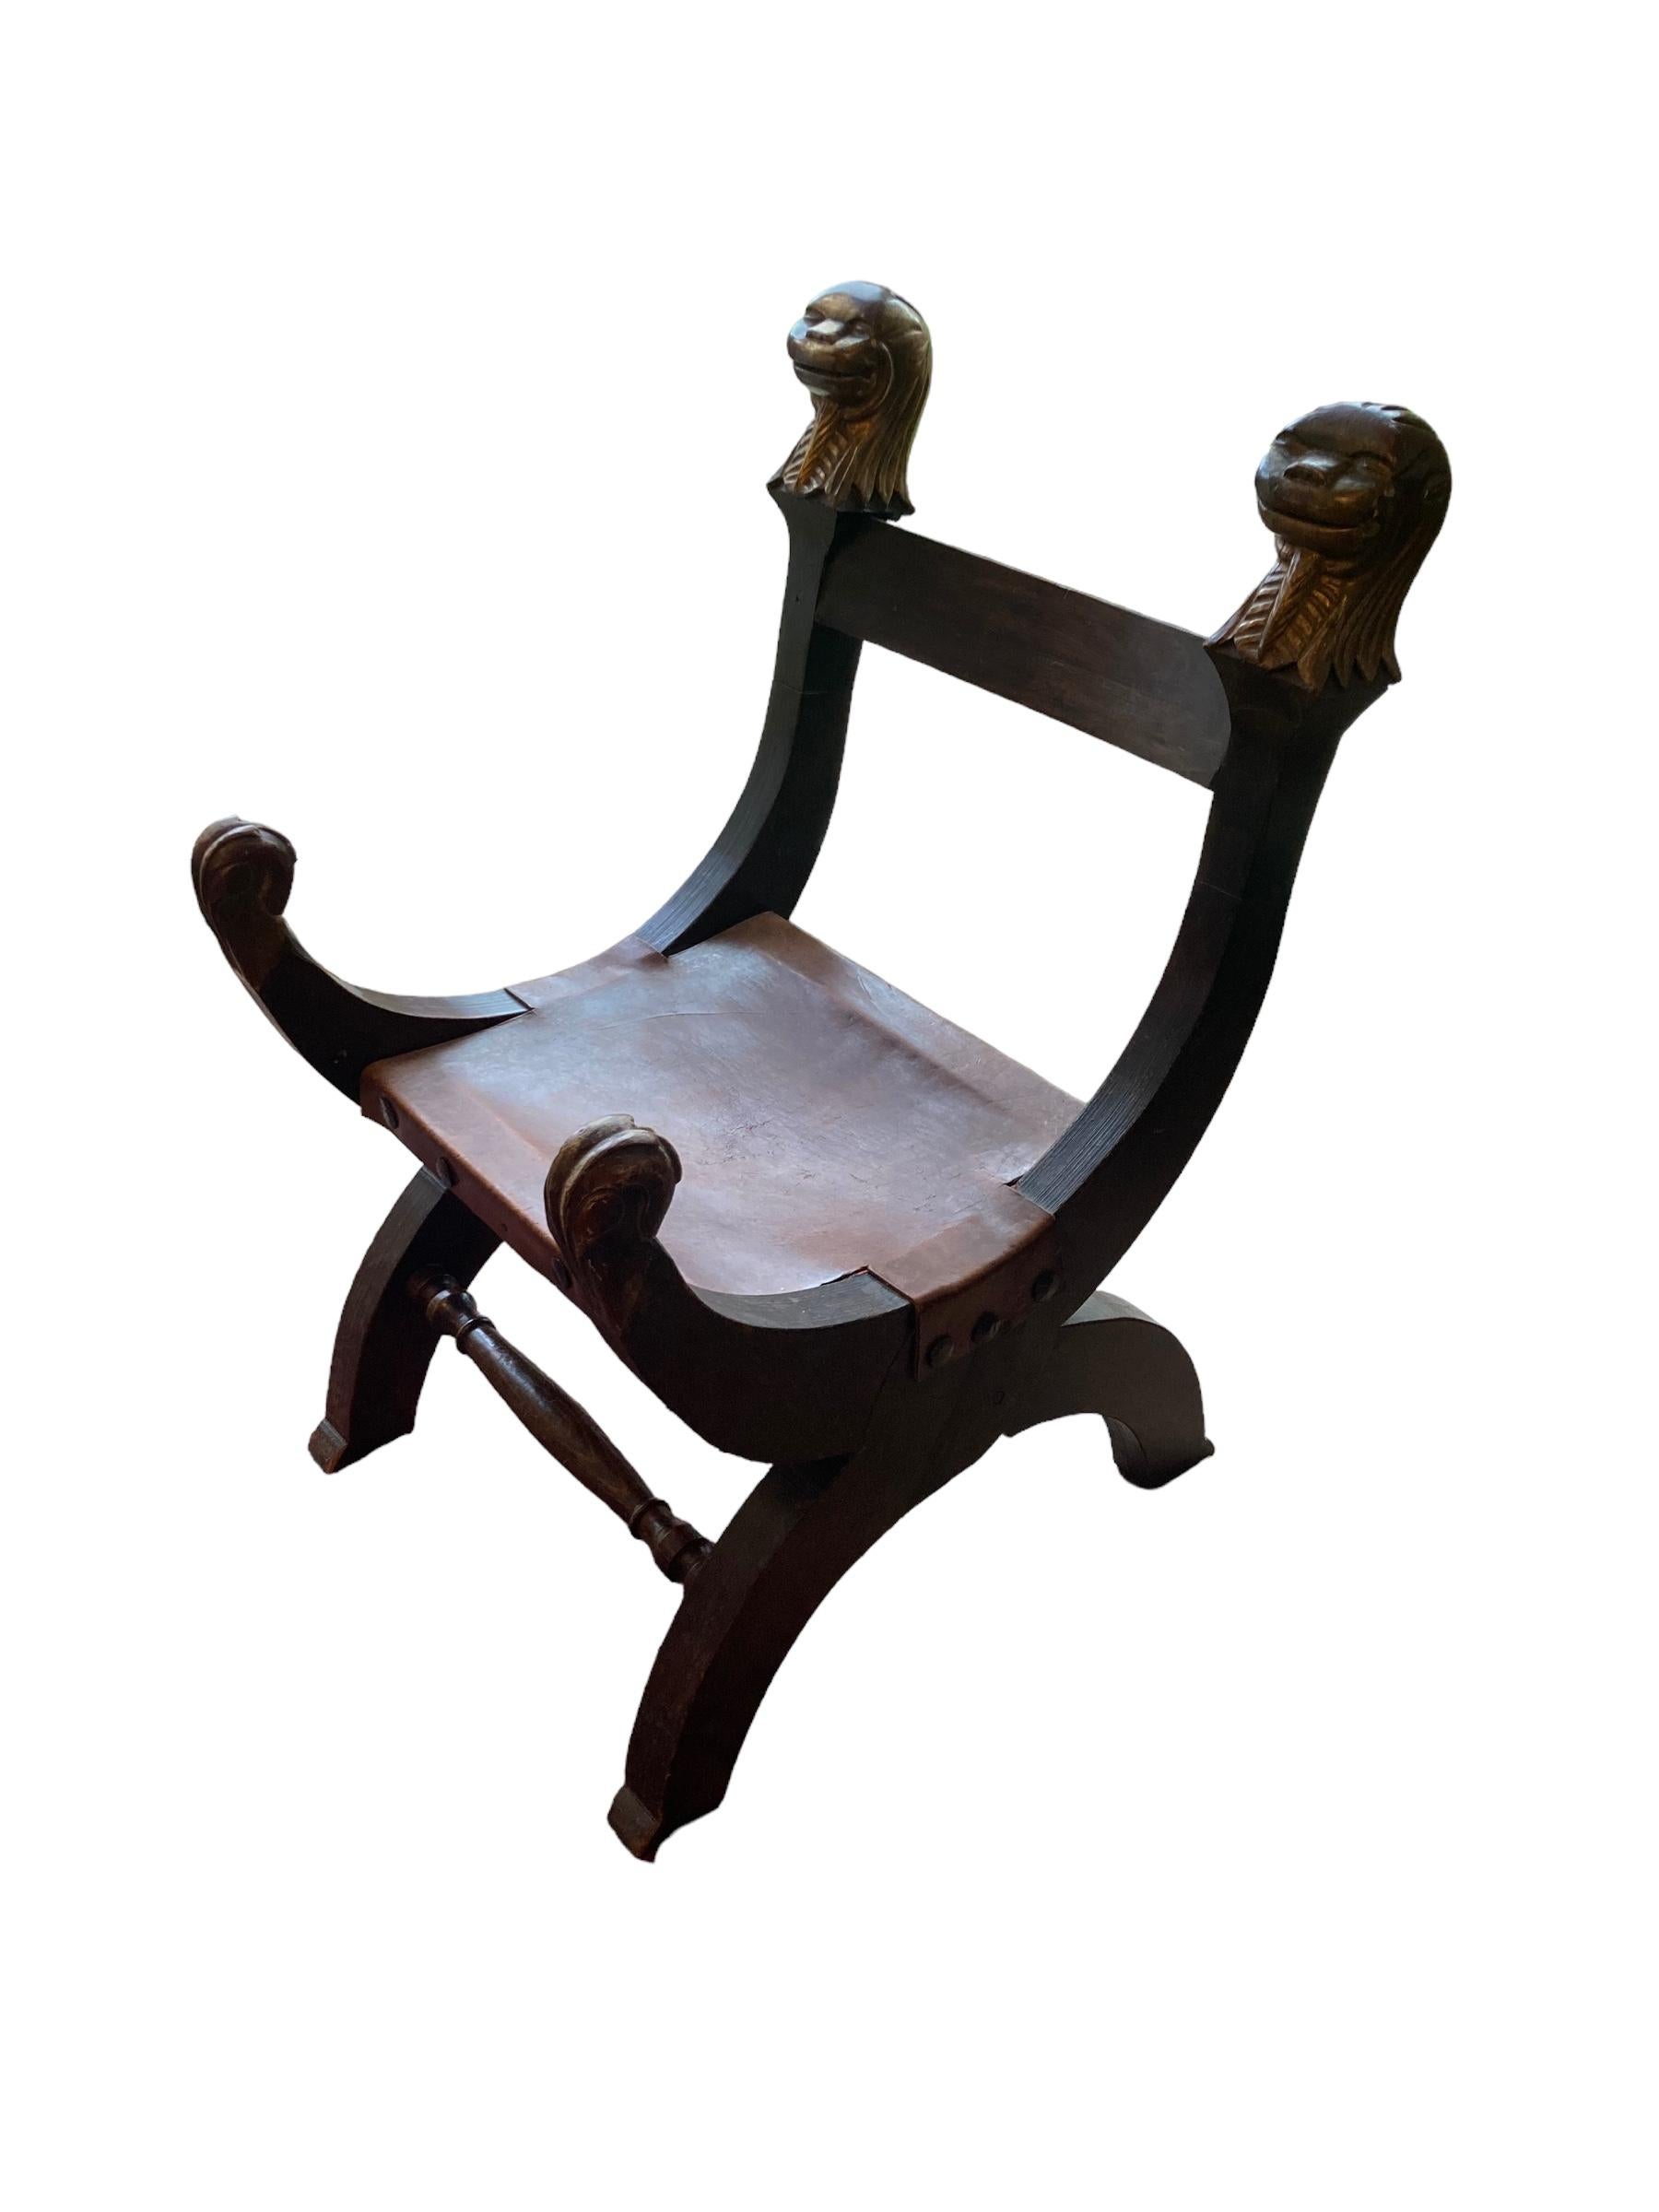 Exotic Oak Mexican Monkey Chair with original leather seating. U shaped frame giving this unusual and rare piece a Savonarola look with its medieval style. It has gilt wood Monkey head finials with oversised iron tacks on the leather seat.

H: 90